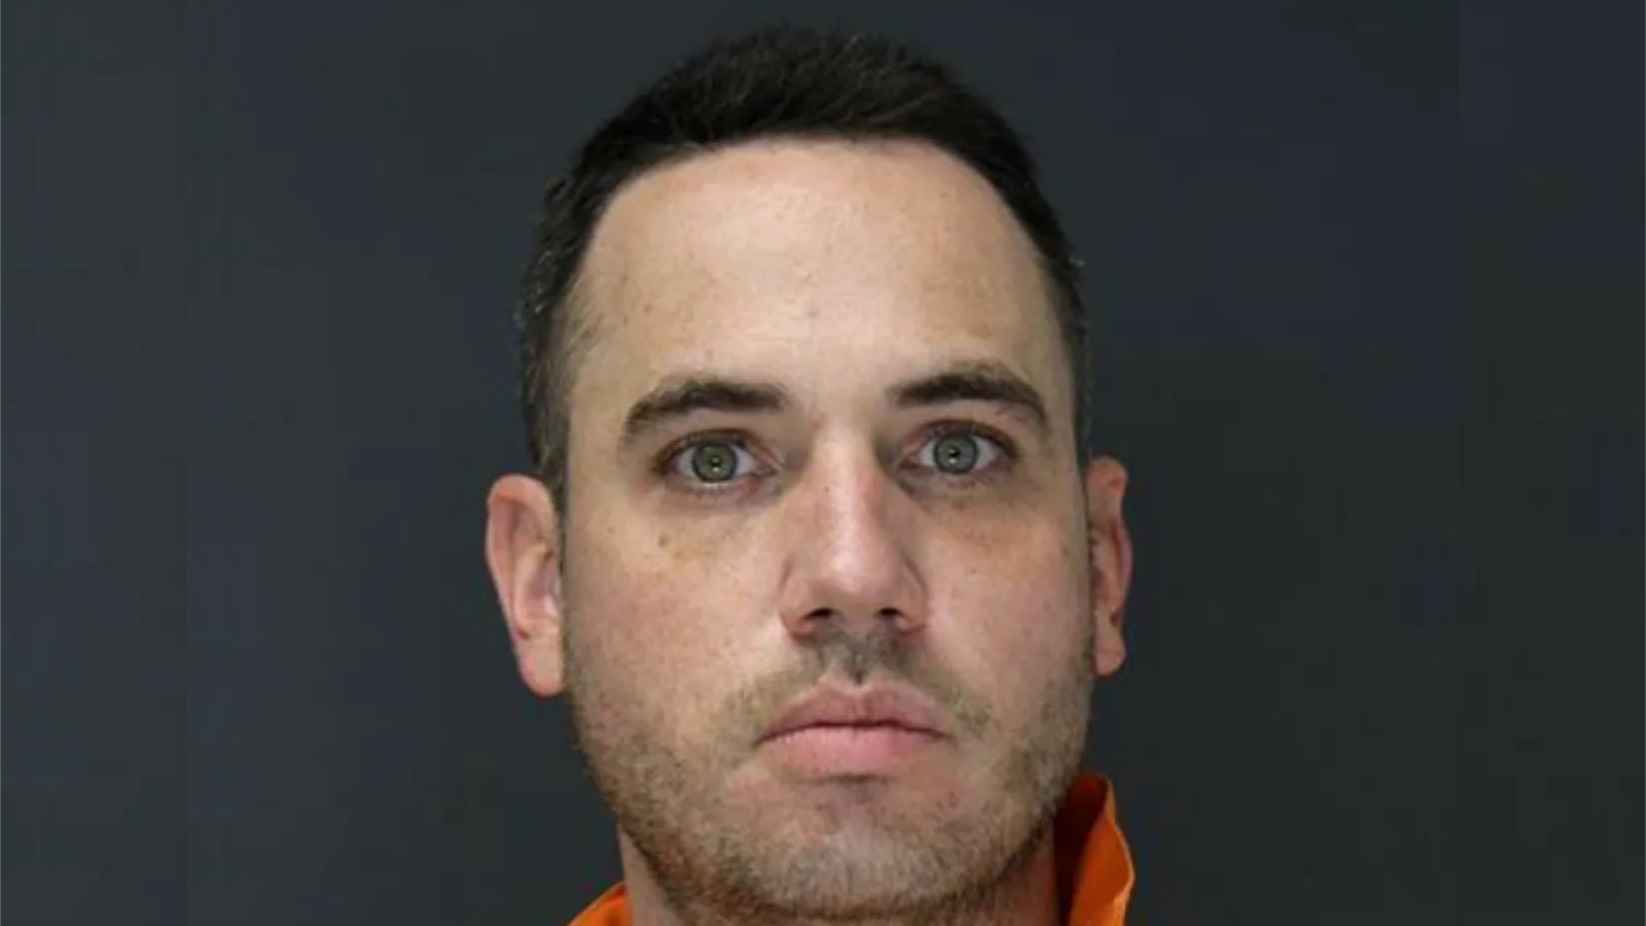 Prosecutor Montvale man jailed over homemade child porn, assault, endangerment — Pascack Press and Northern Valley Press picture